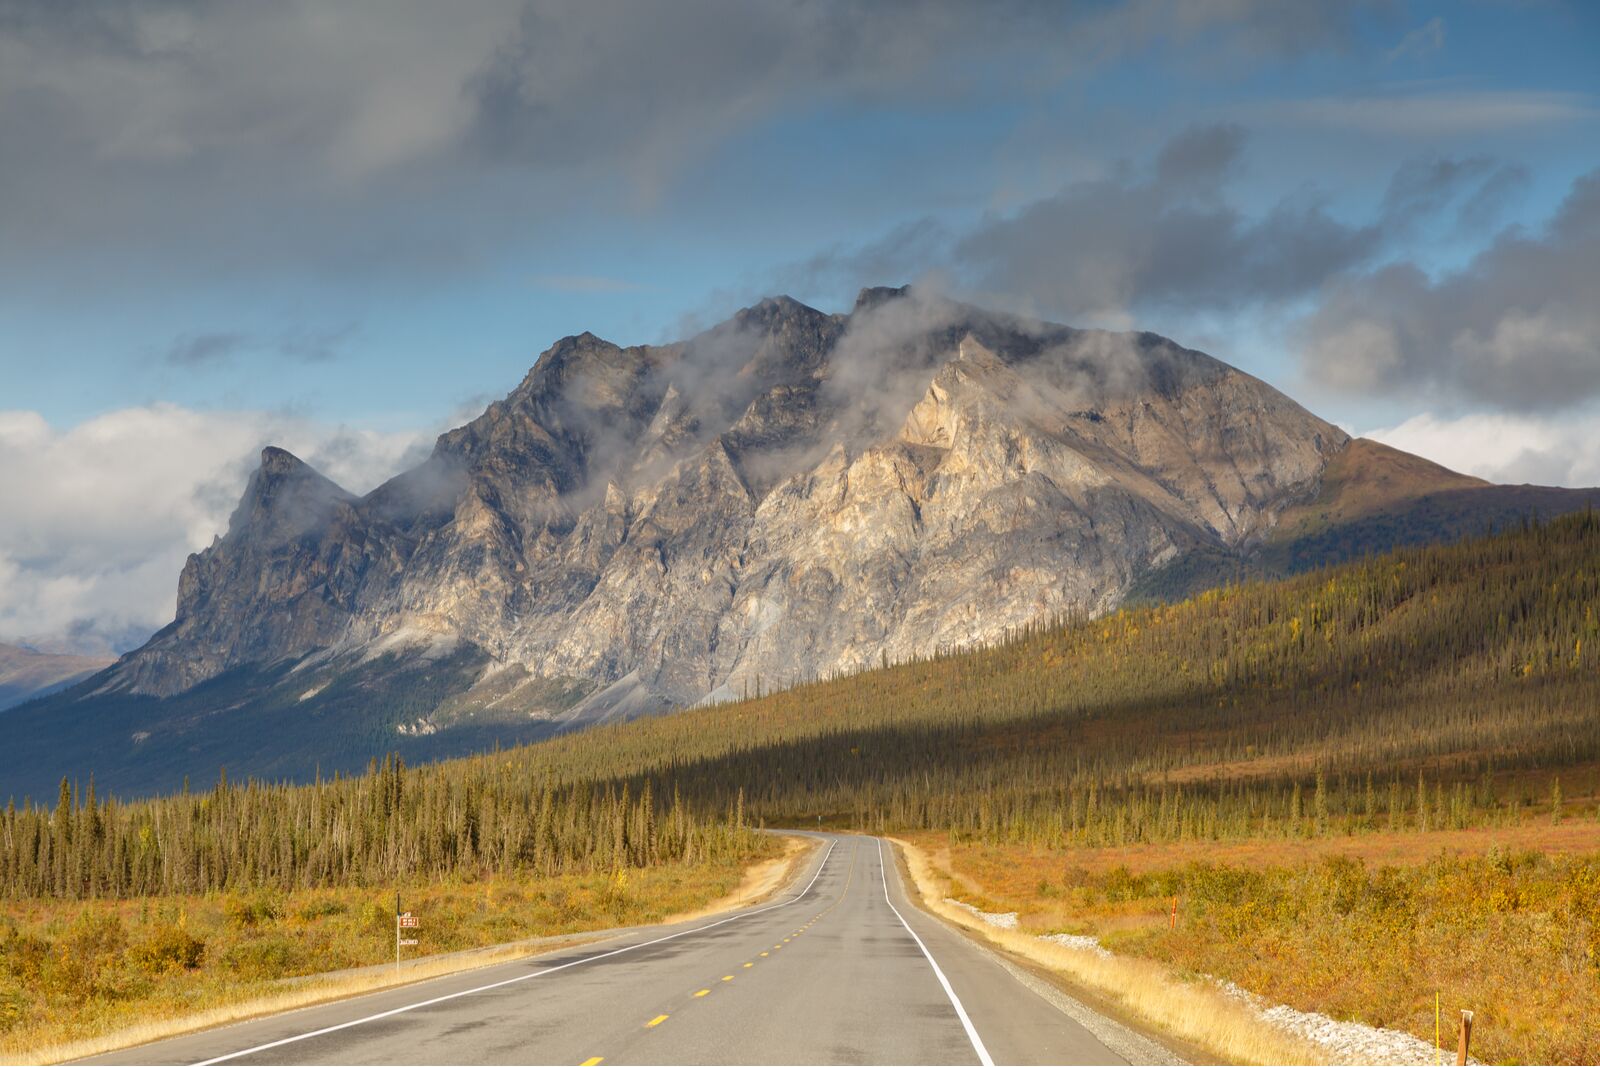 Dalton highway near a town with one of the best funny place names: deadhorse, Alaska 